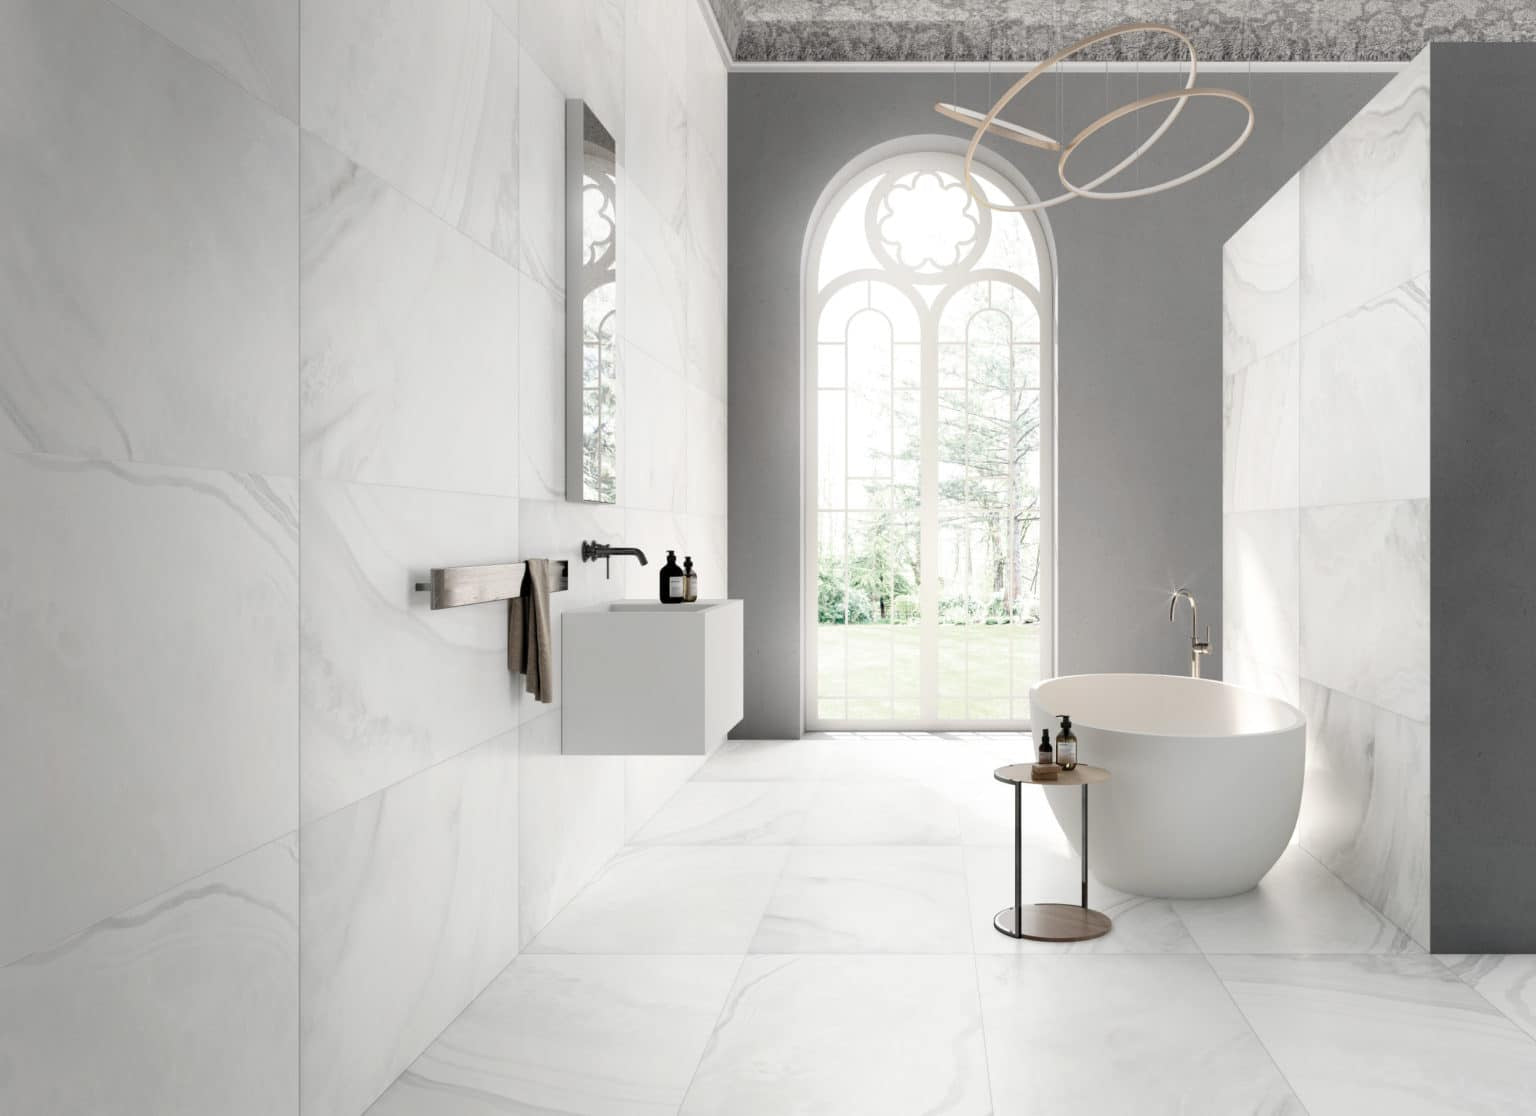 White Onyx Monte Carlo 24×48 Polished Porcelain Tile in Bathroom